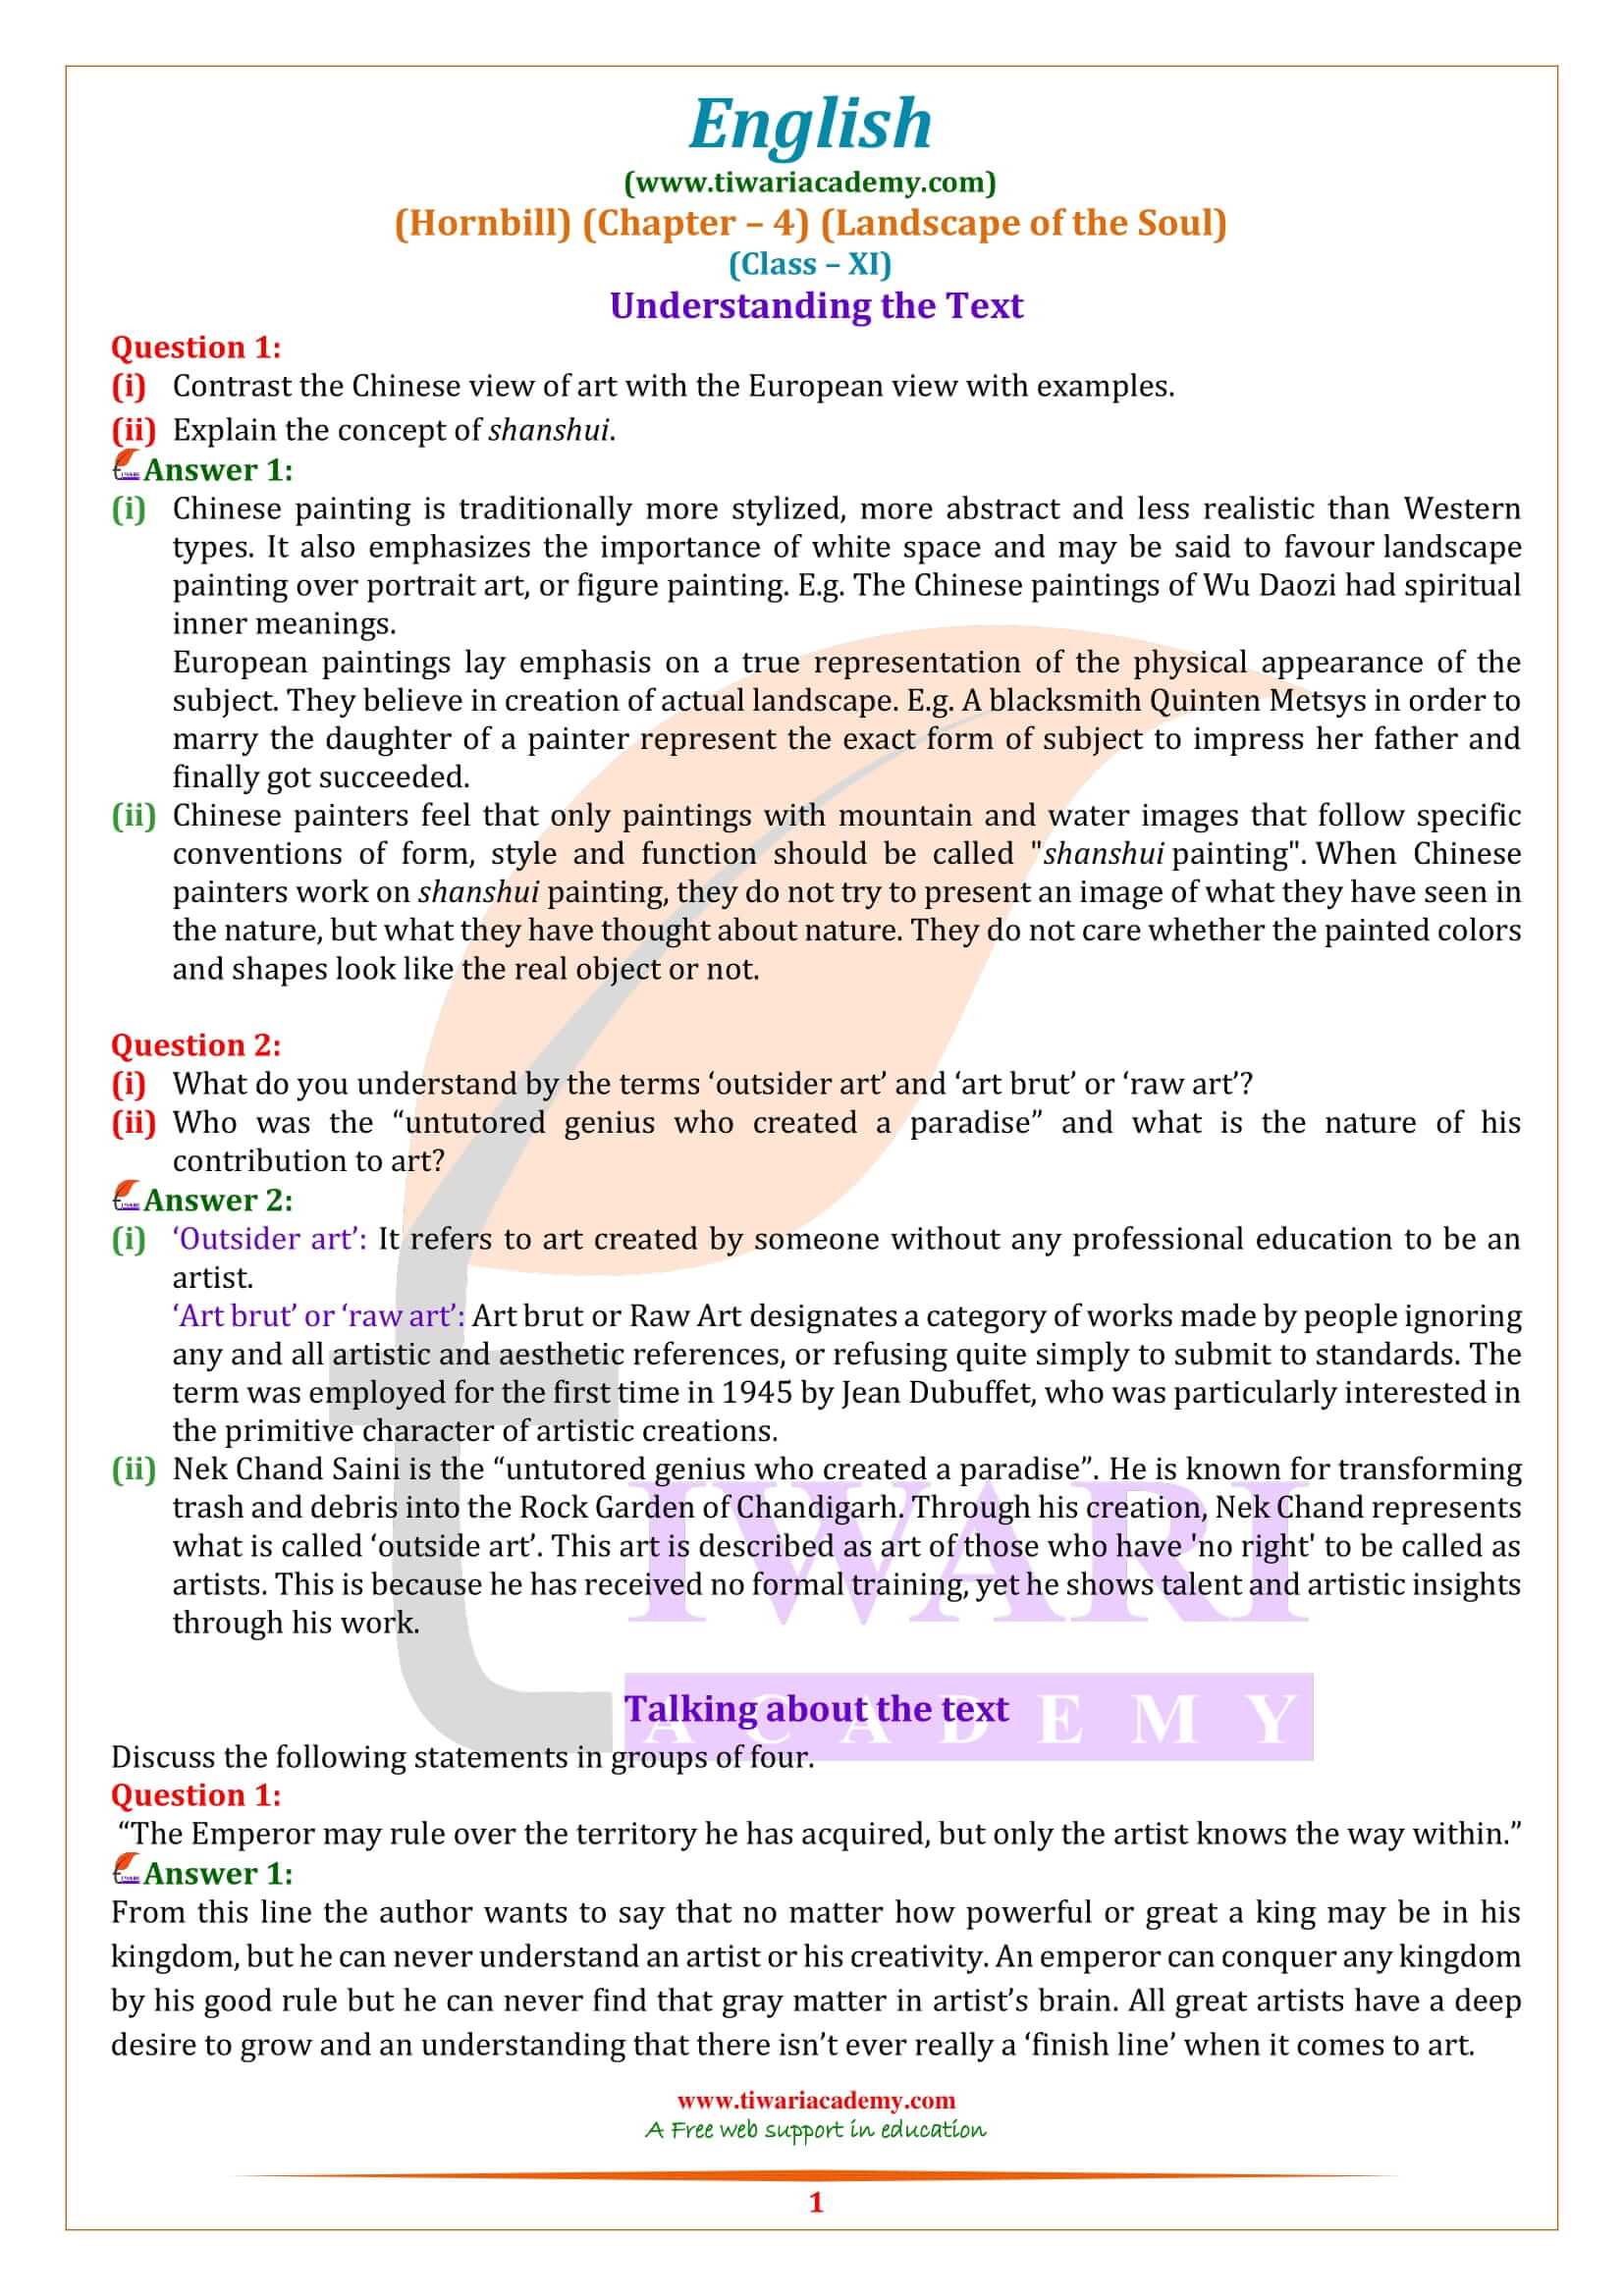 NCERT Solutions for Class 11 English Hornbill Chapter 4 Question Answers